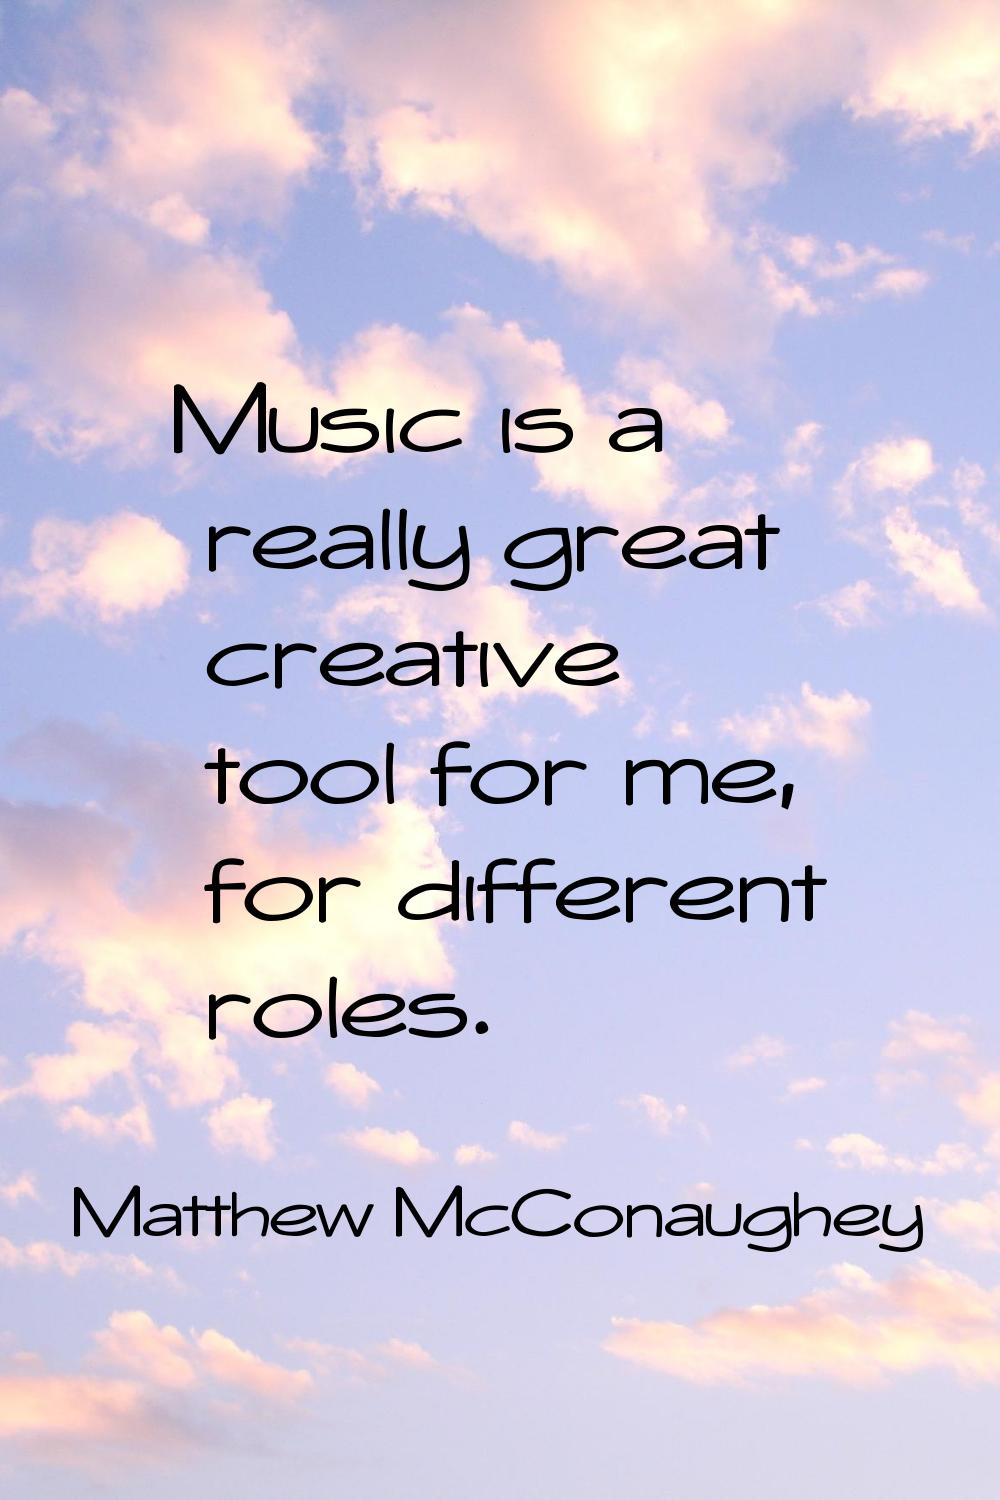 Music is a really great creative tool for me, for different roles.